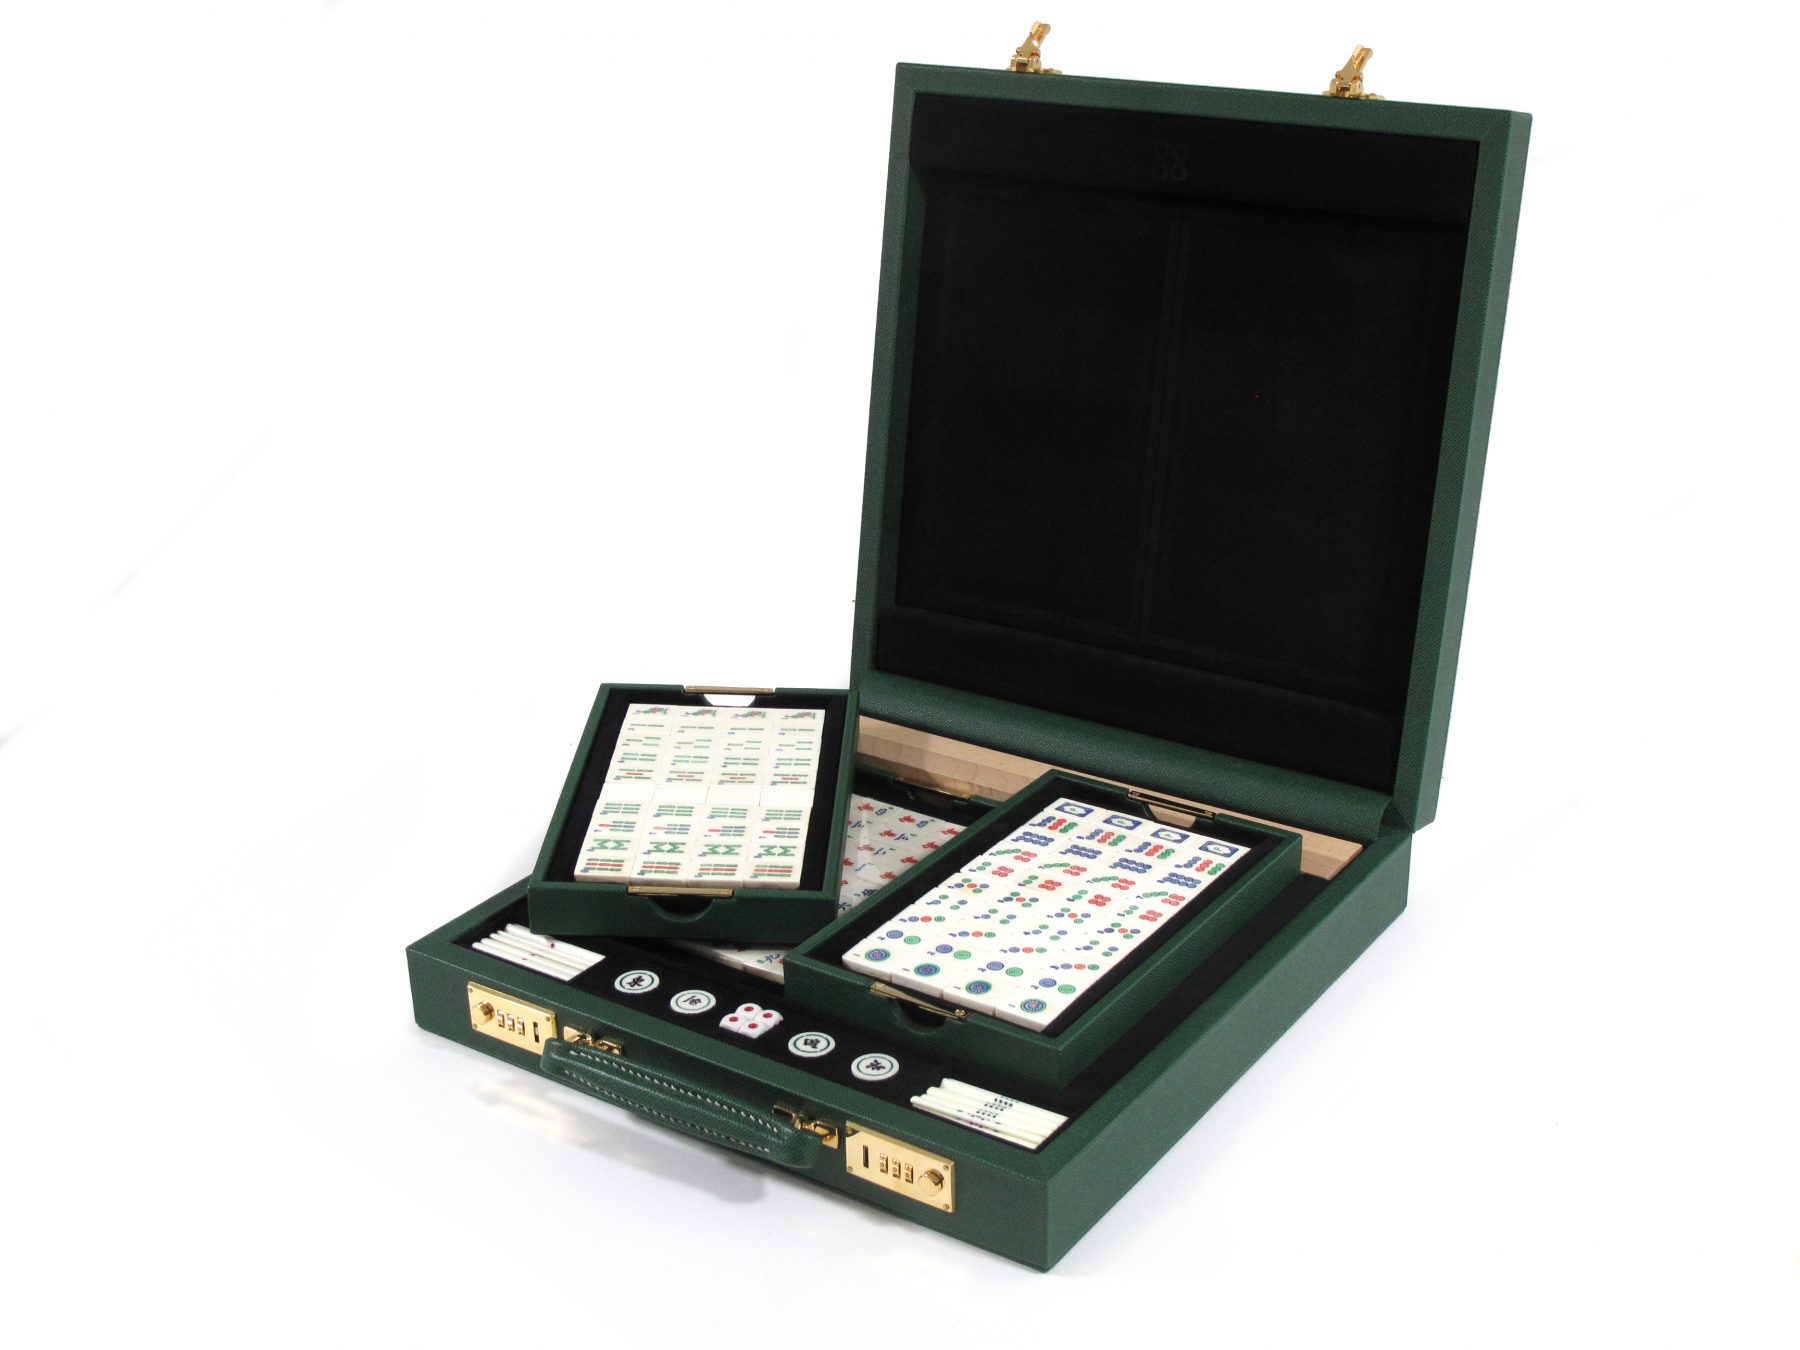 Tiffany & Co.'s Mahjong Set Comes In A Leather Box With Walnut Wood Tiles &  Silver Dice For Atas Mahjong Lovers 